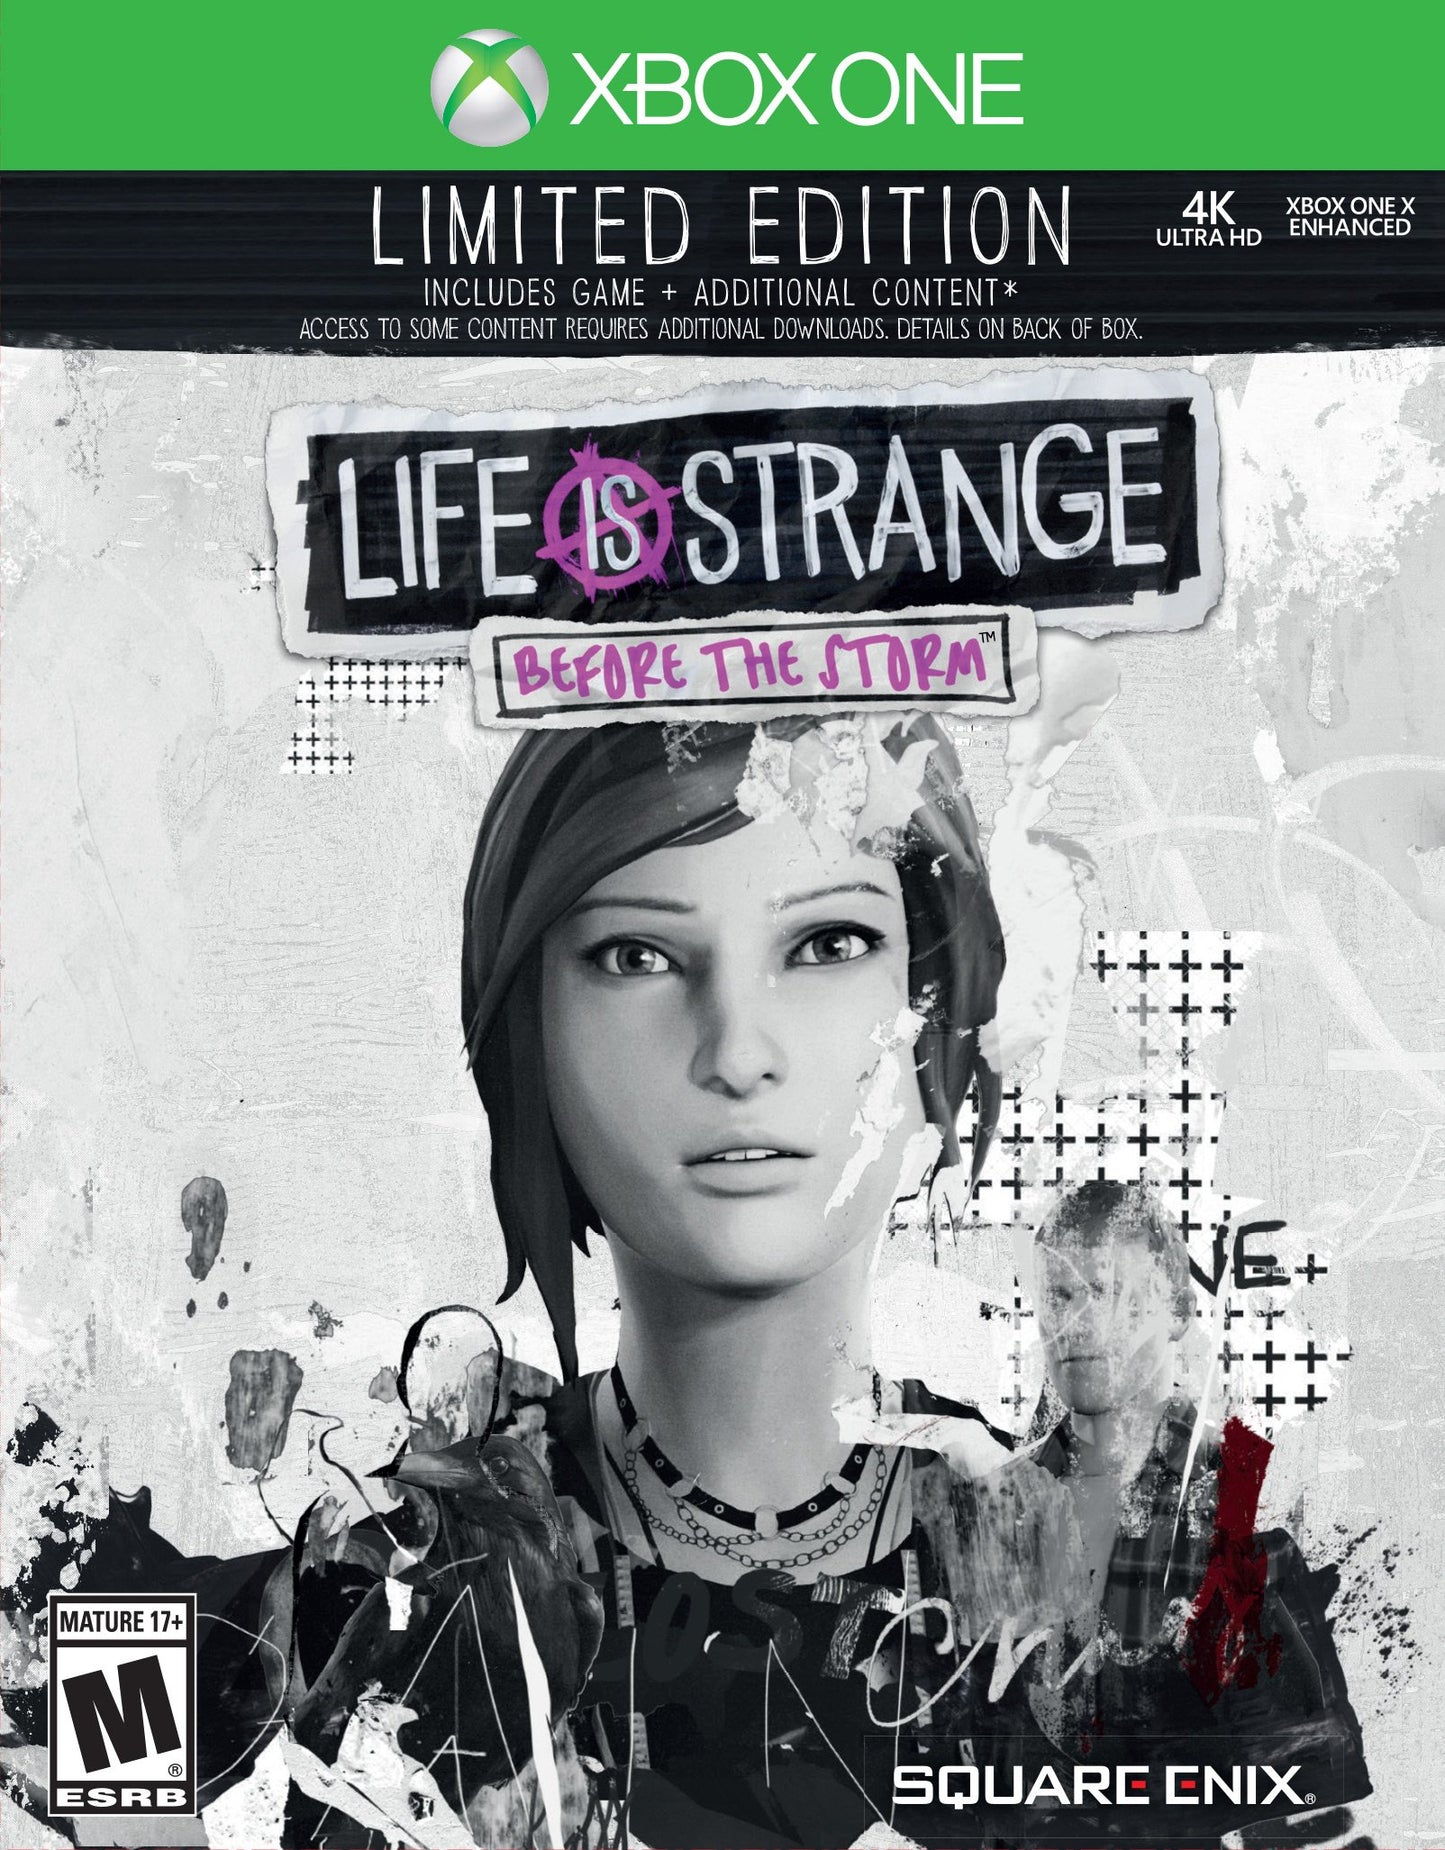 Life is Strange before the storm - Limited Edition